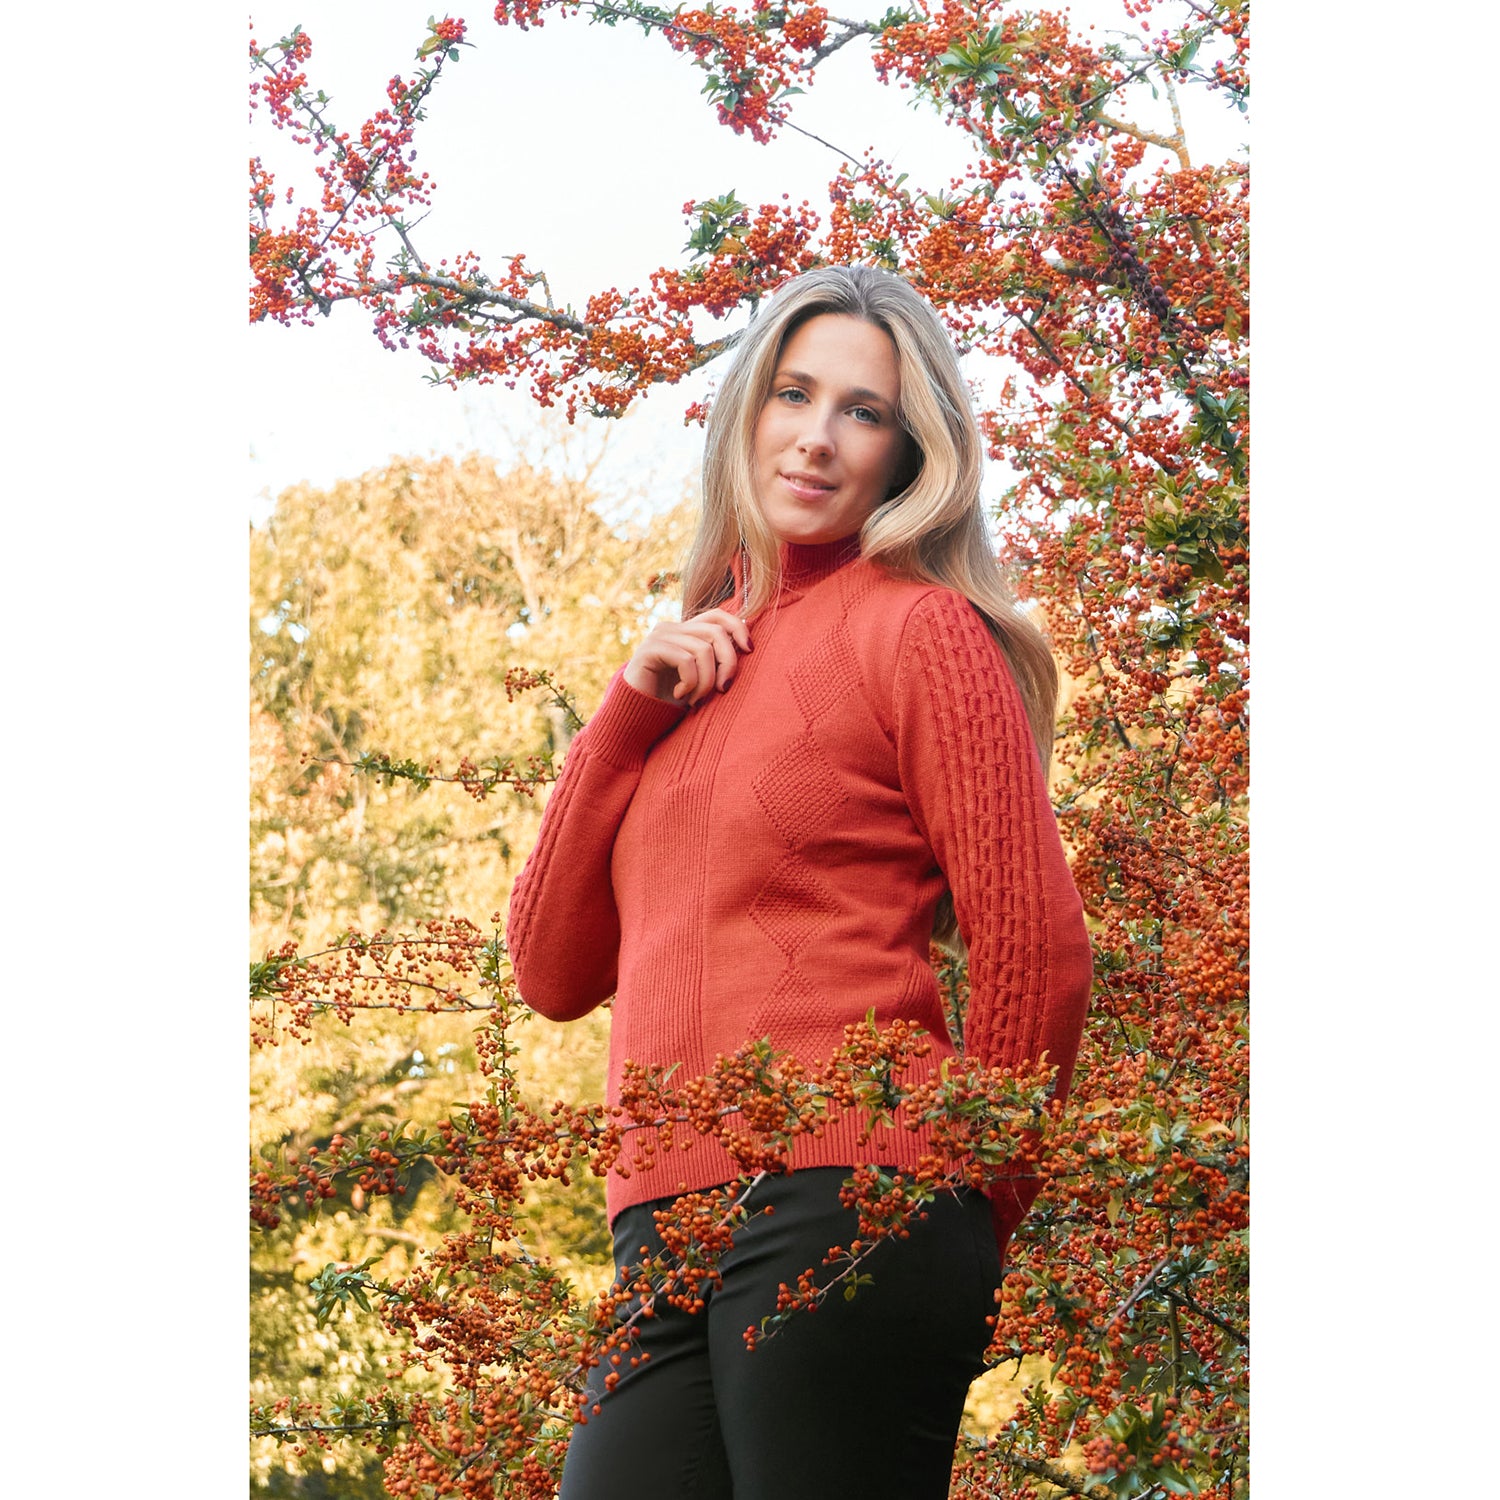 Pure Ladies Cable Knit Lined Quarter Zip Sweater in Orange